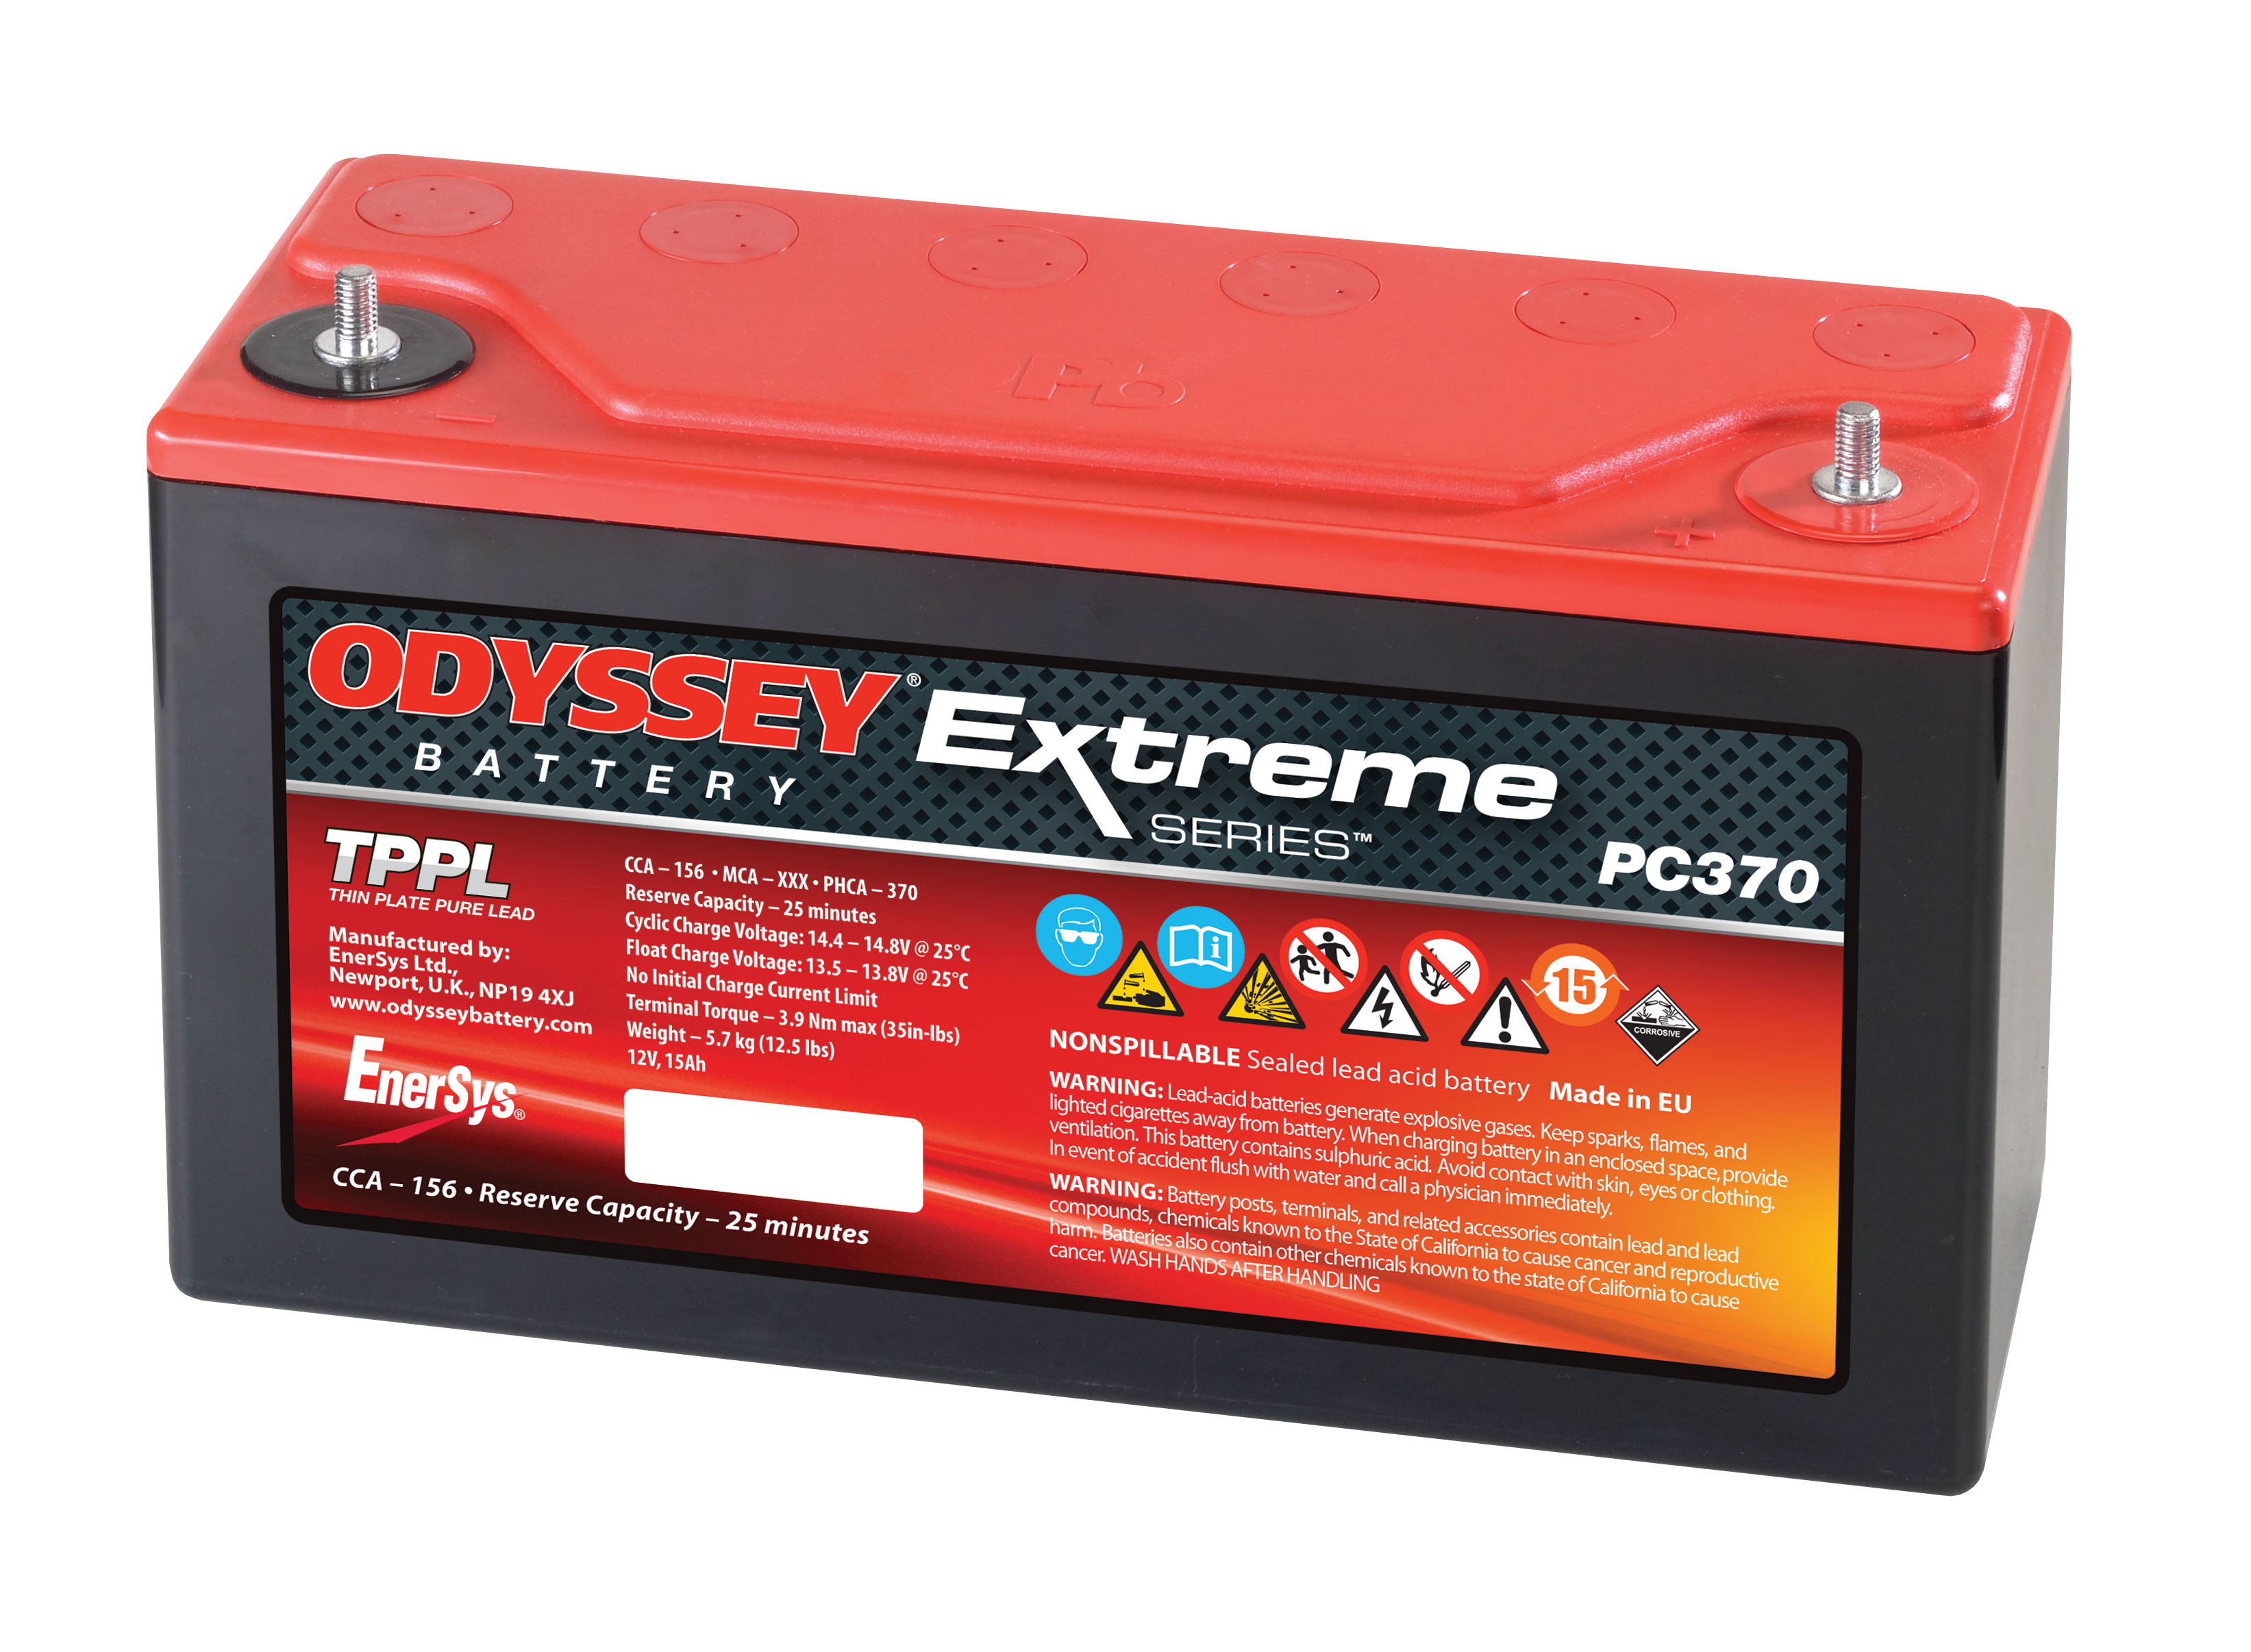 Odyssey Extreme PC370 Product Picture.jpg